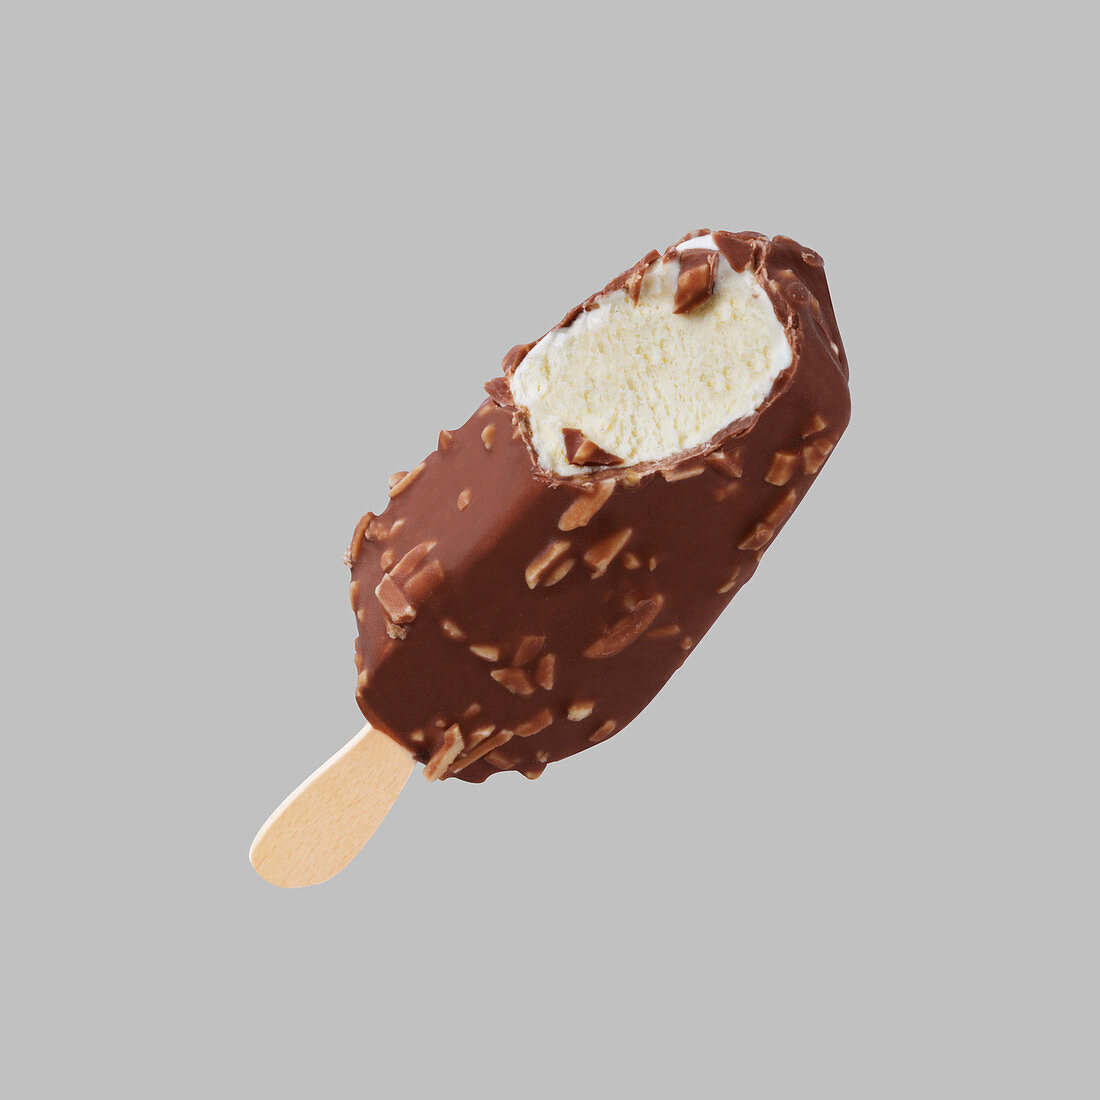 A chocolate and almond ice lolly